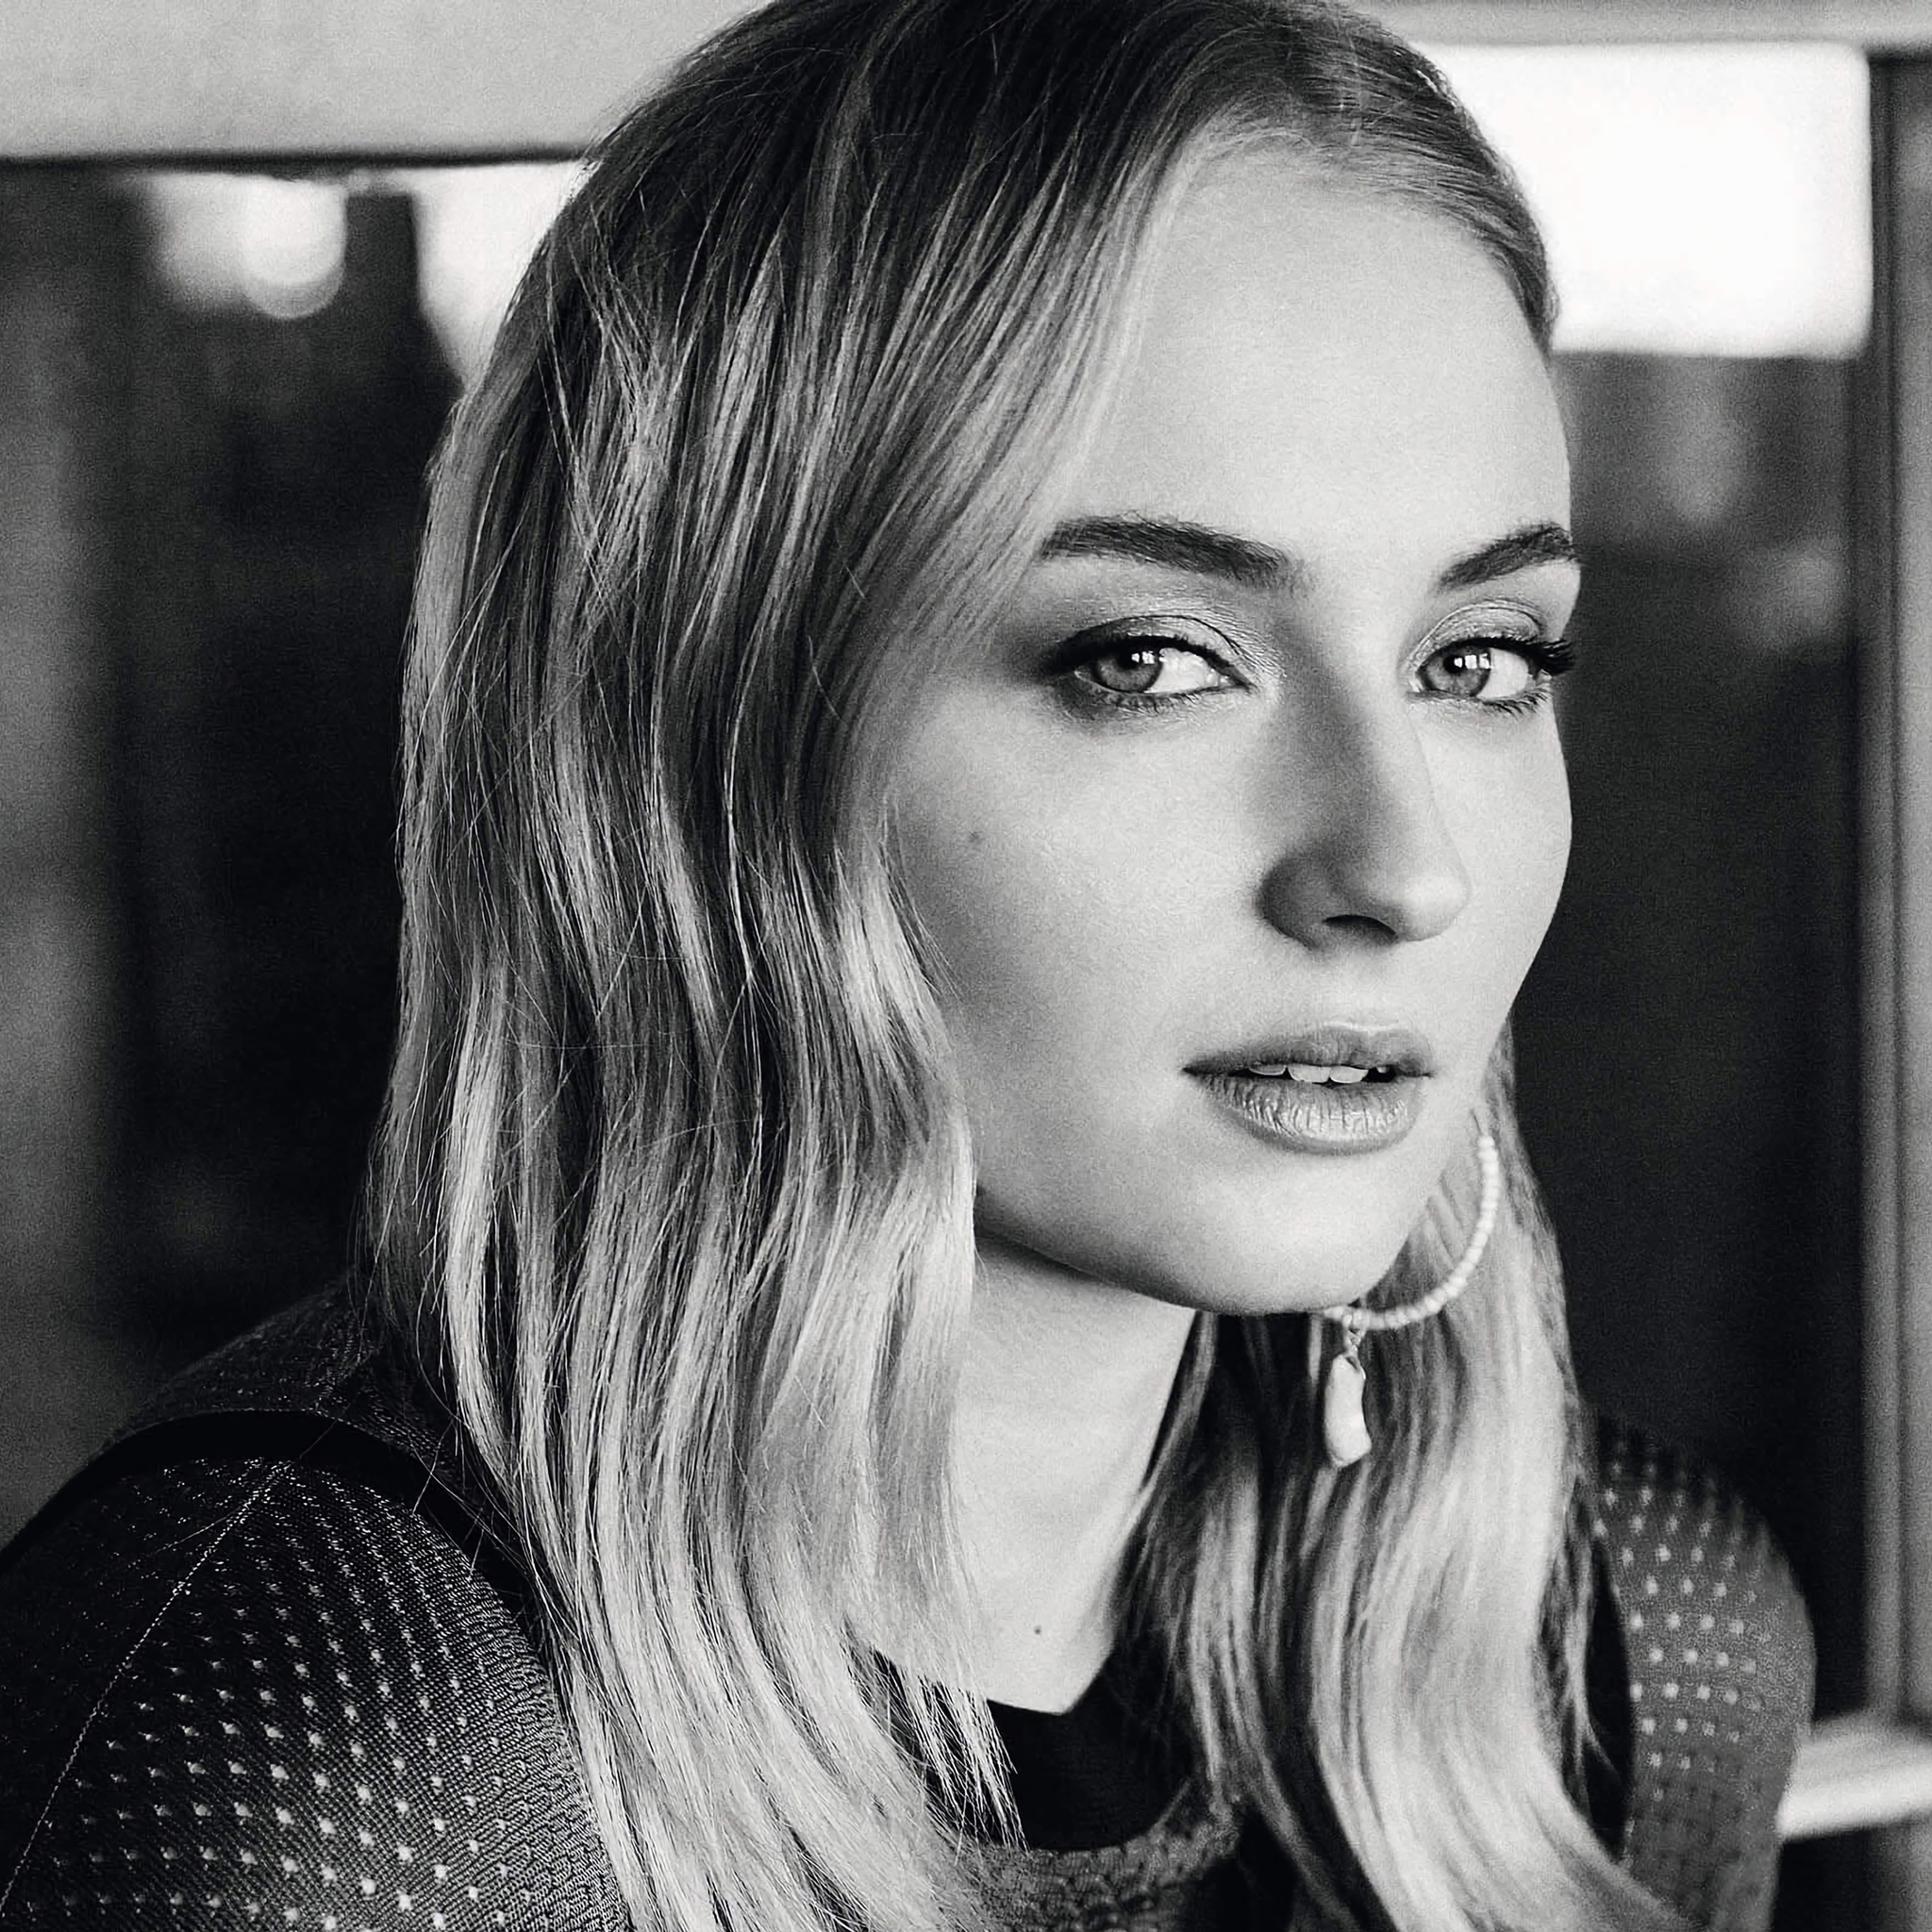 Sophie Turner Monochrome Wallpapers